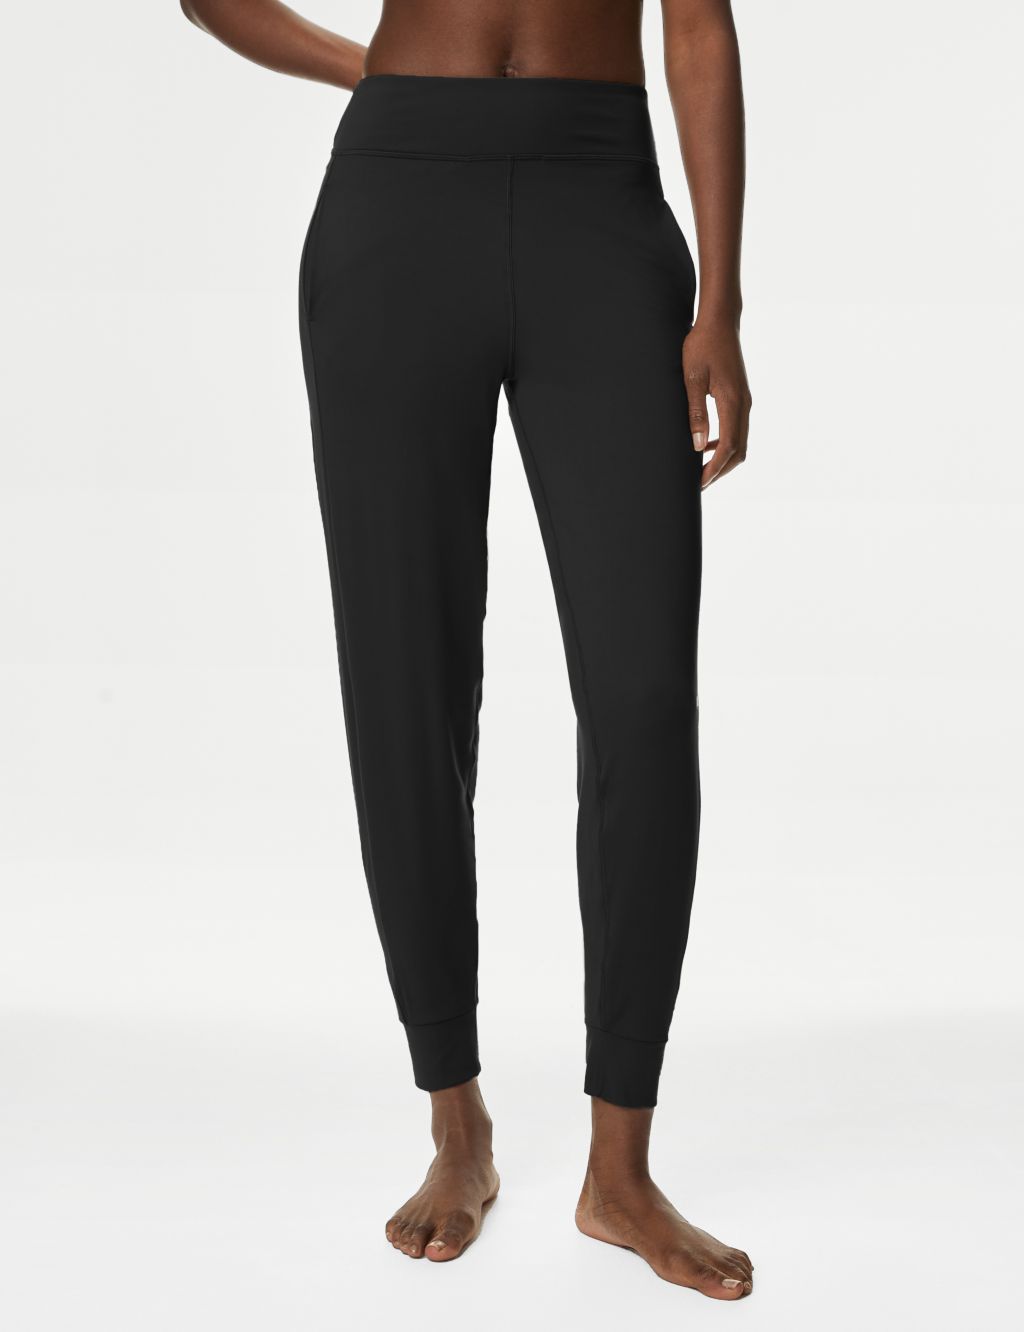 Member's Mark Women's Ribbed Active Jogger (as1  